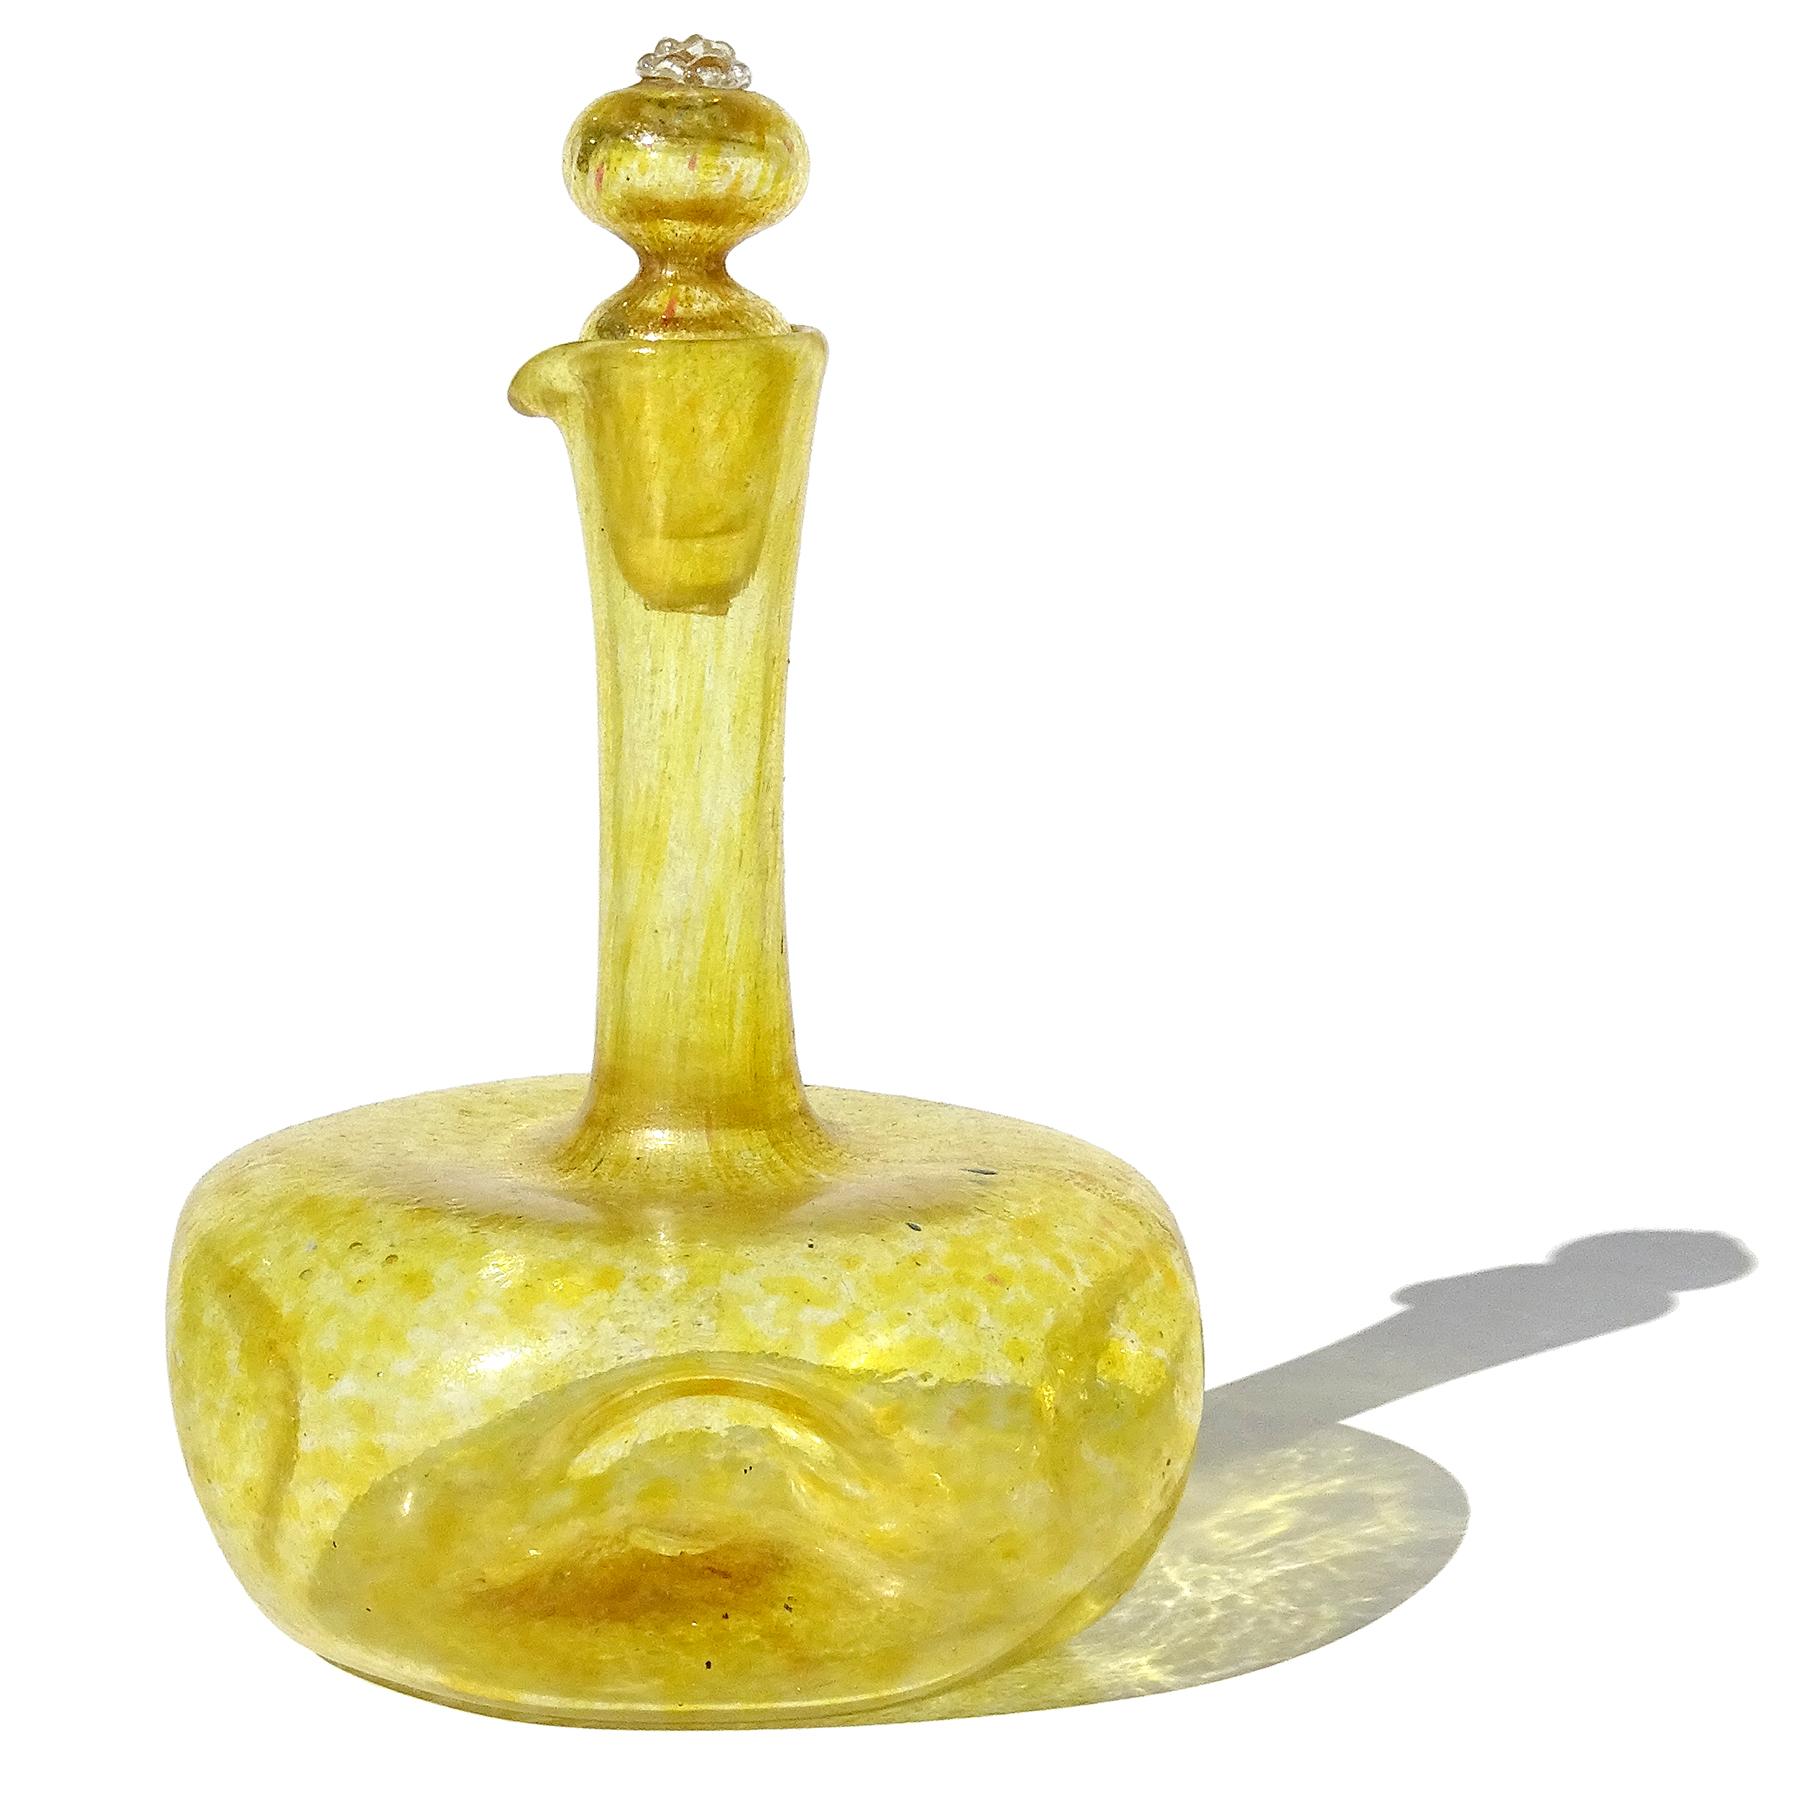 Beautiful antique, early Venetian hand blown yellow and gold flecks Italian art glass cruet with original stopper. Attributed to the Compagnia Di Venezia E Murano (C.V.M.) glasshouse. The bottle has a rounded form, but dimpled on each side, making